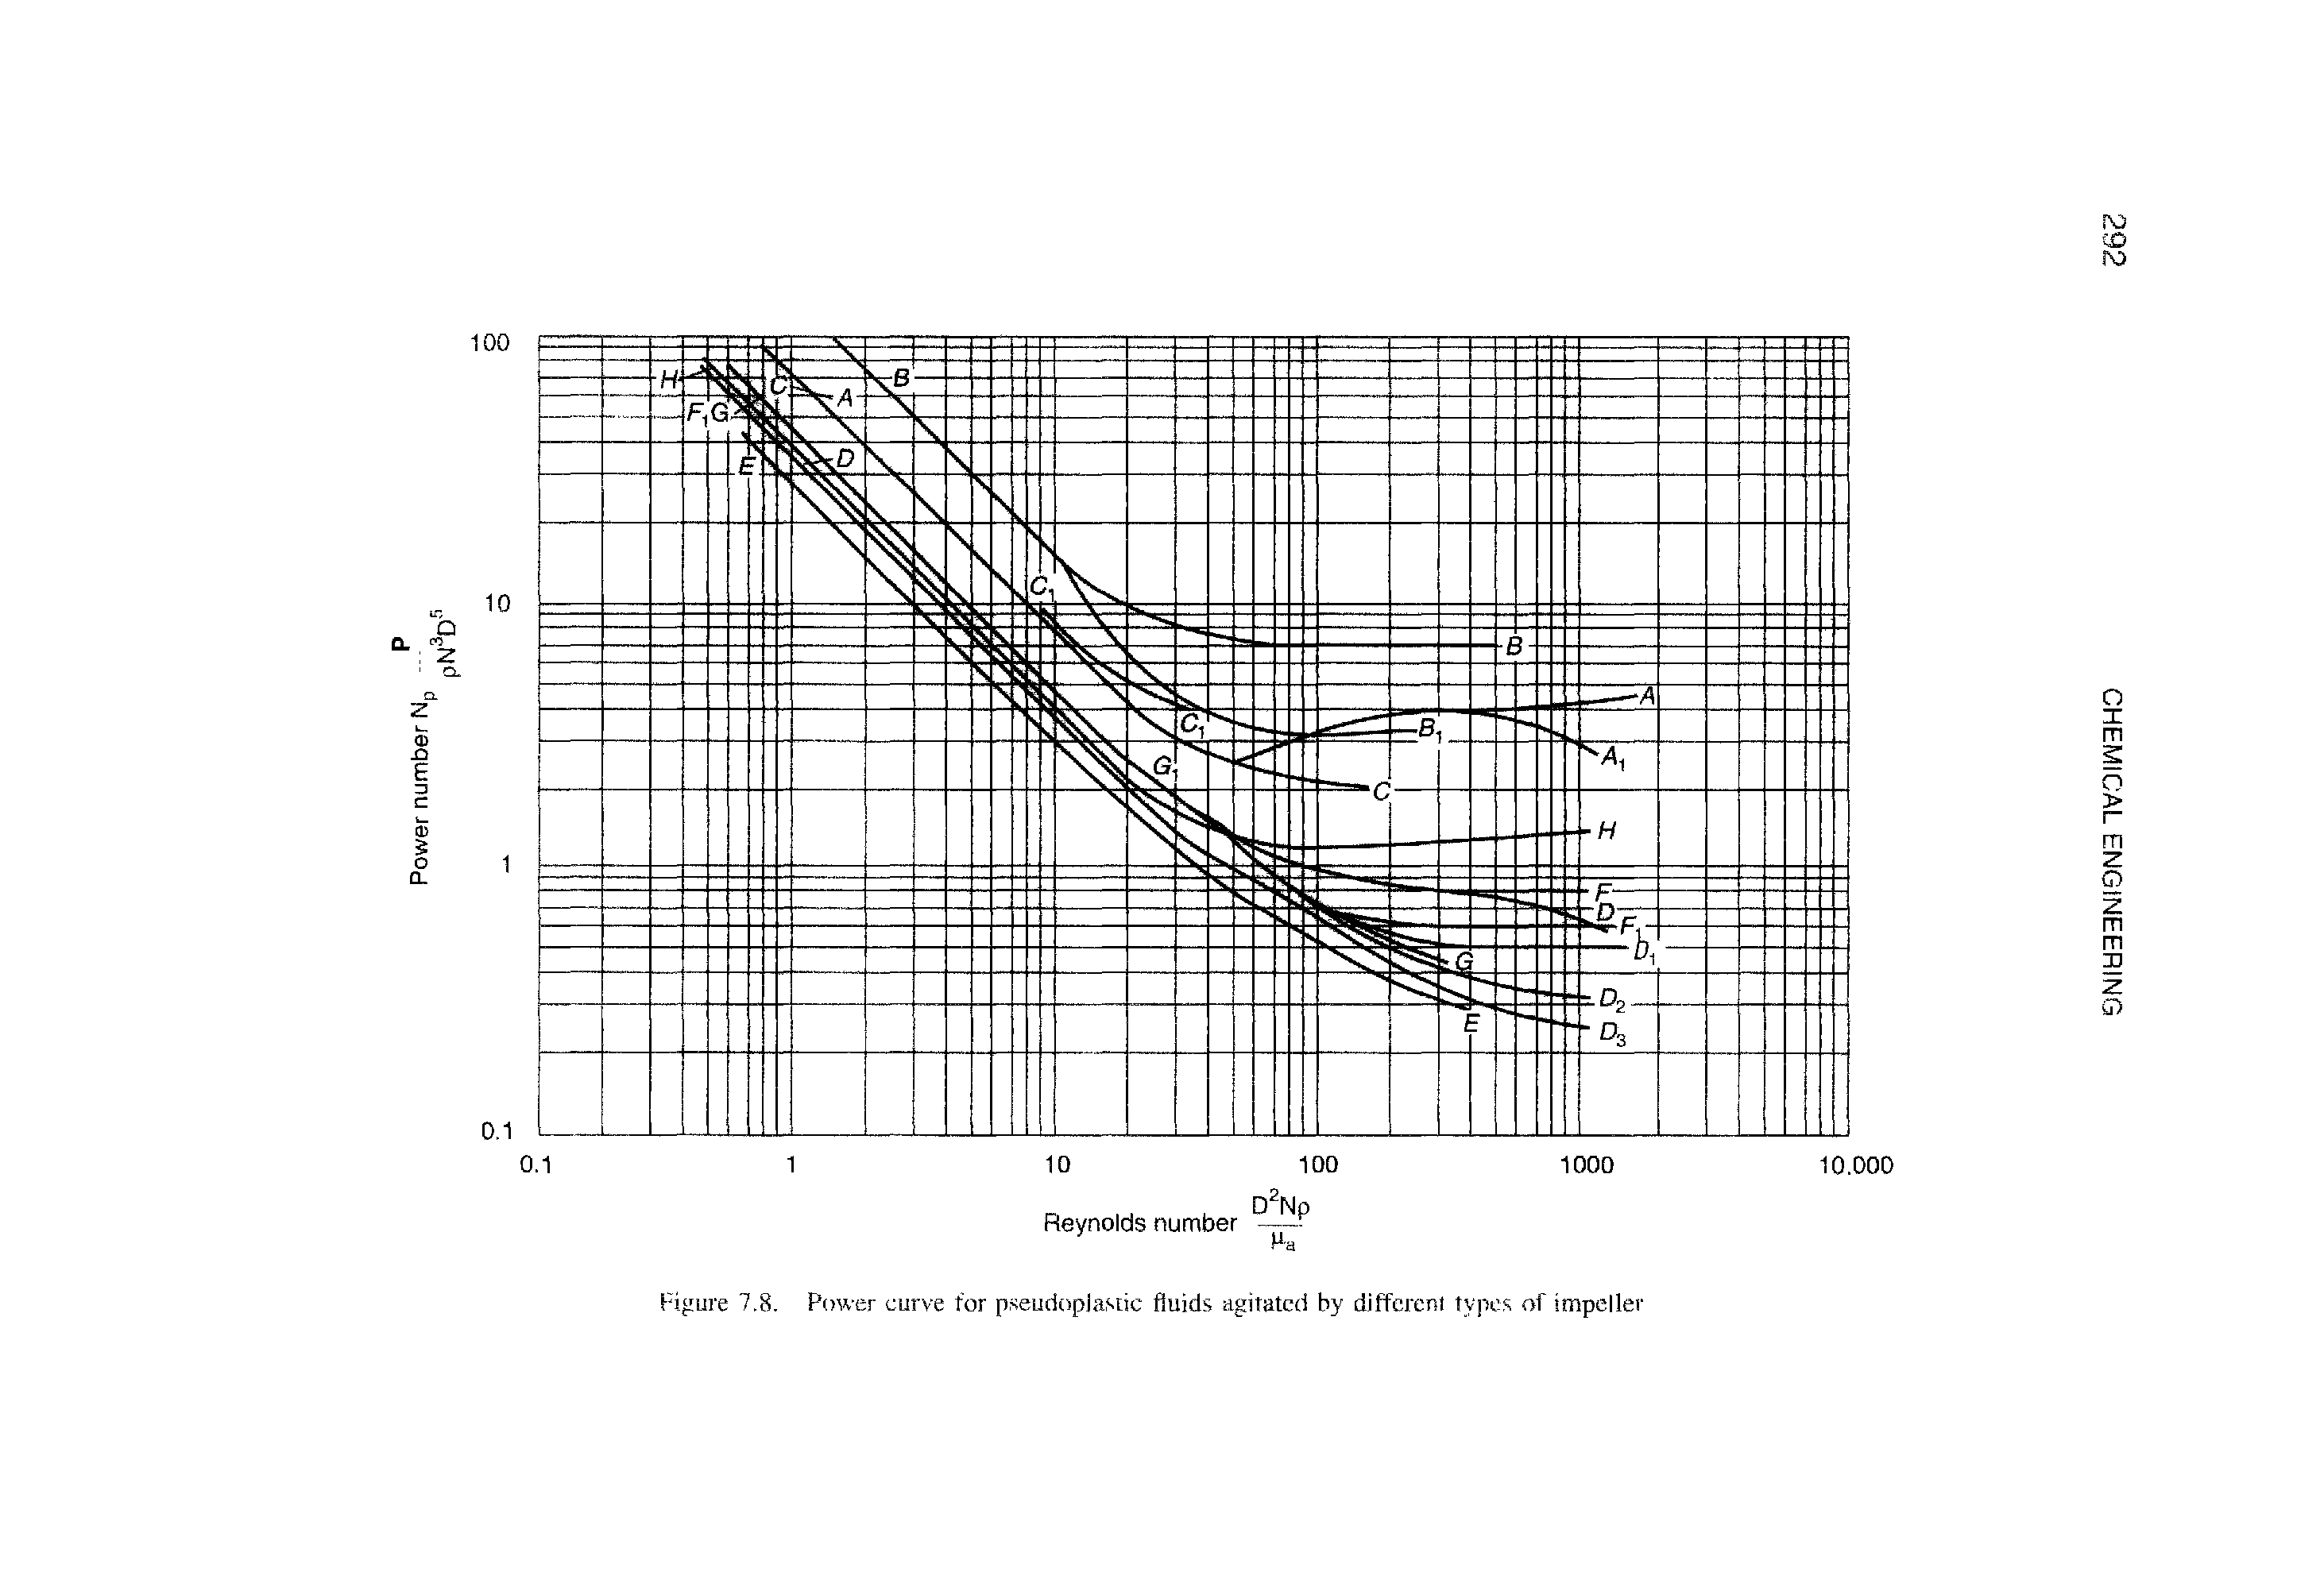 Figure 7.8. Power curve for pseudoplastic fluids agitated by different types of impeller...